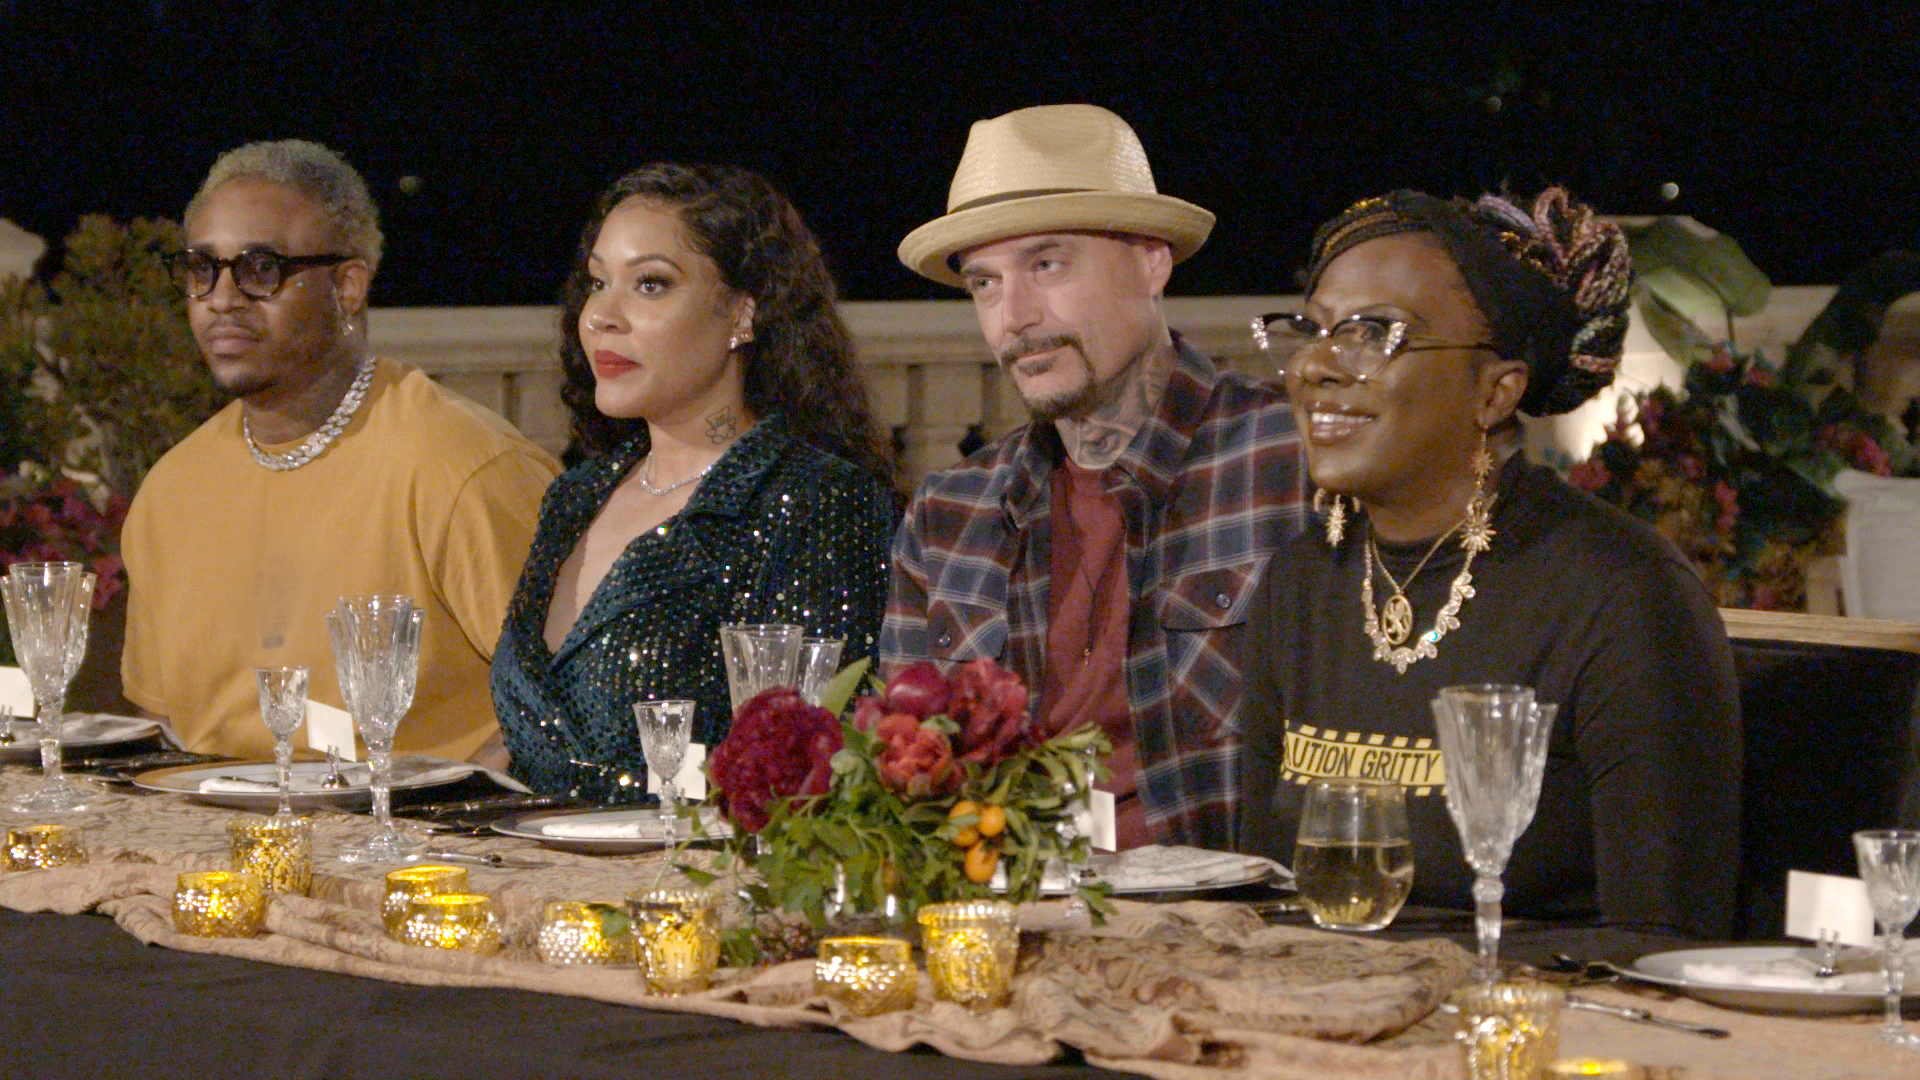 Watch This Season On #HipHopBootCamp! | Marriage Boot Camp: Hip Hop Edition Video Extras